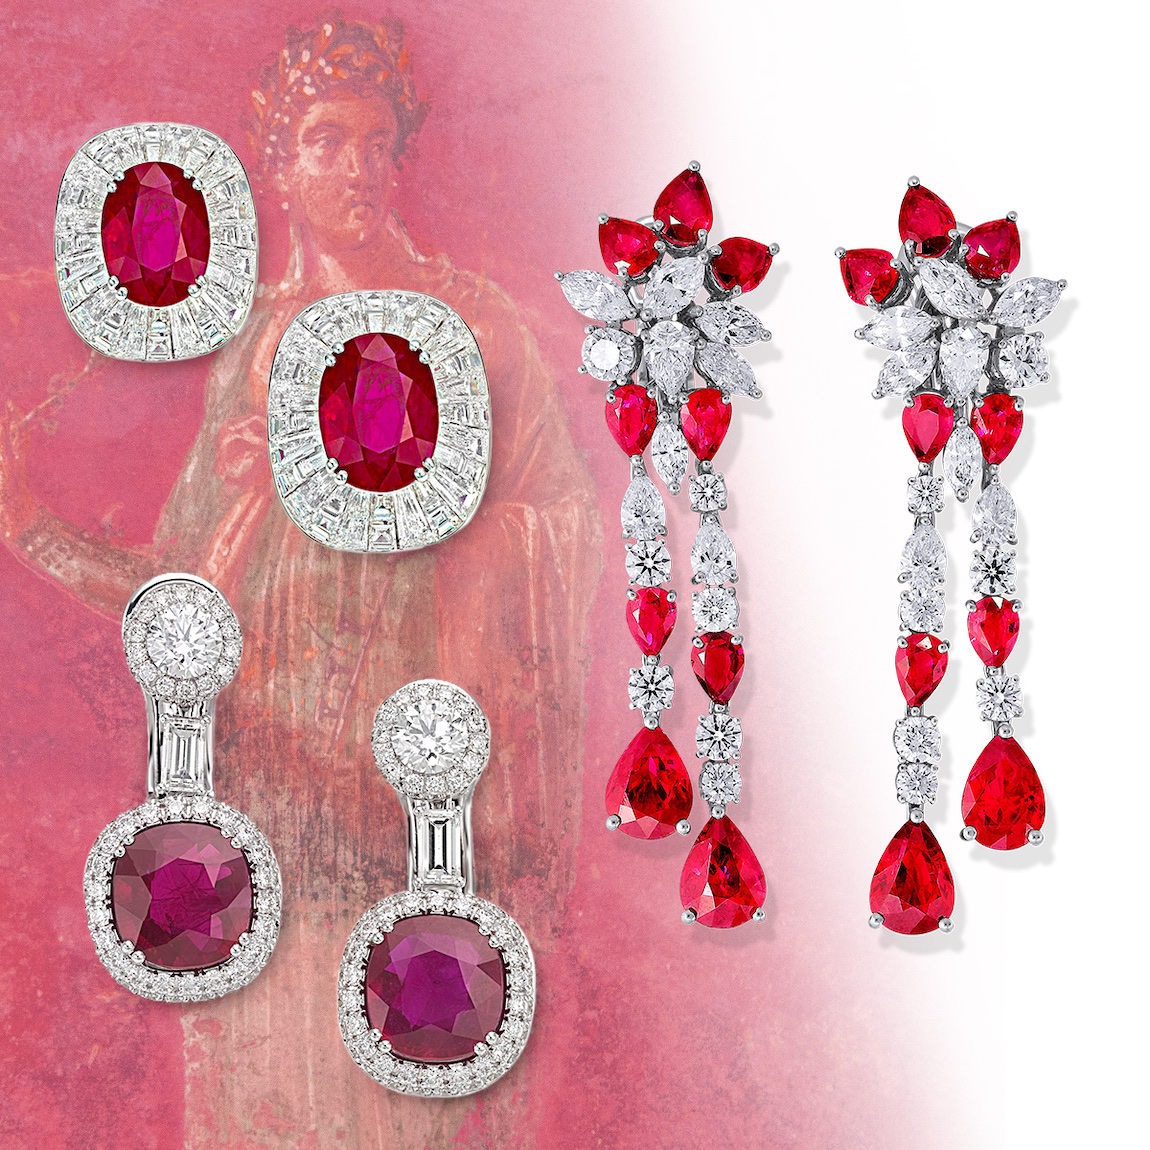 PICCHIOTTI Floral Chandelier earrings, PICCHIOTTI Ruby & Diamond Masterpieces earrings, Masterpieces Oval Ruby earrings